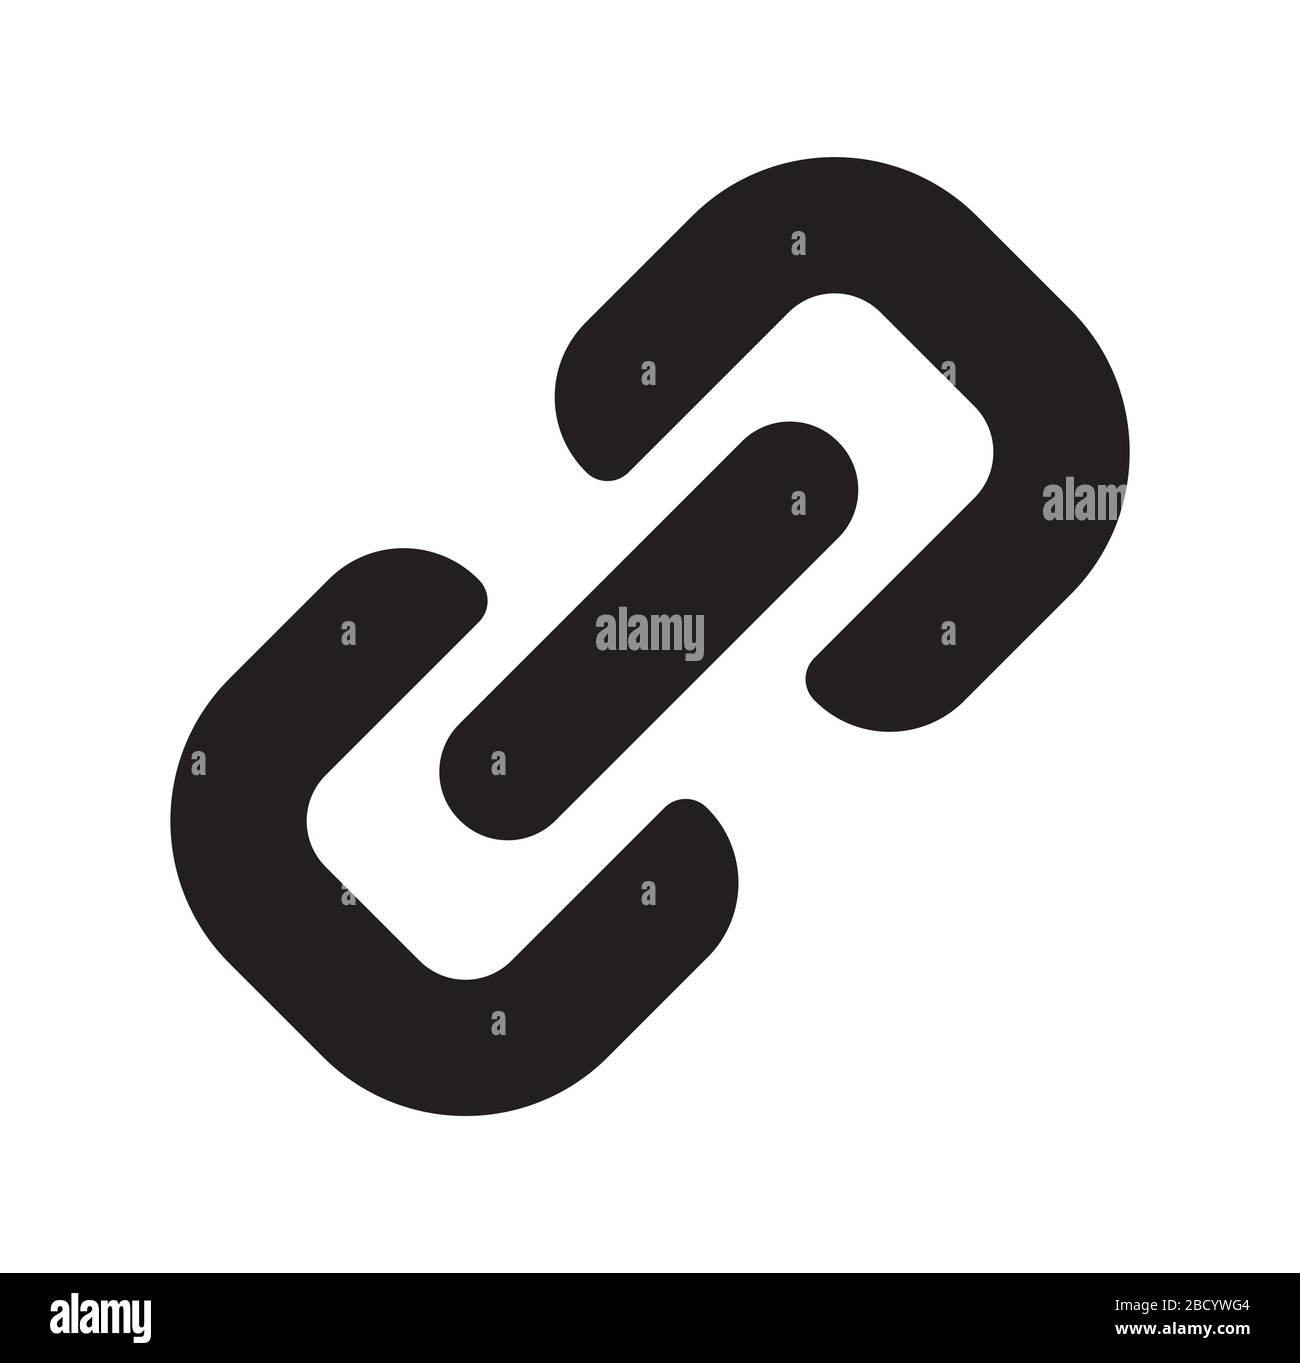 chain / link icon Stock Vector